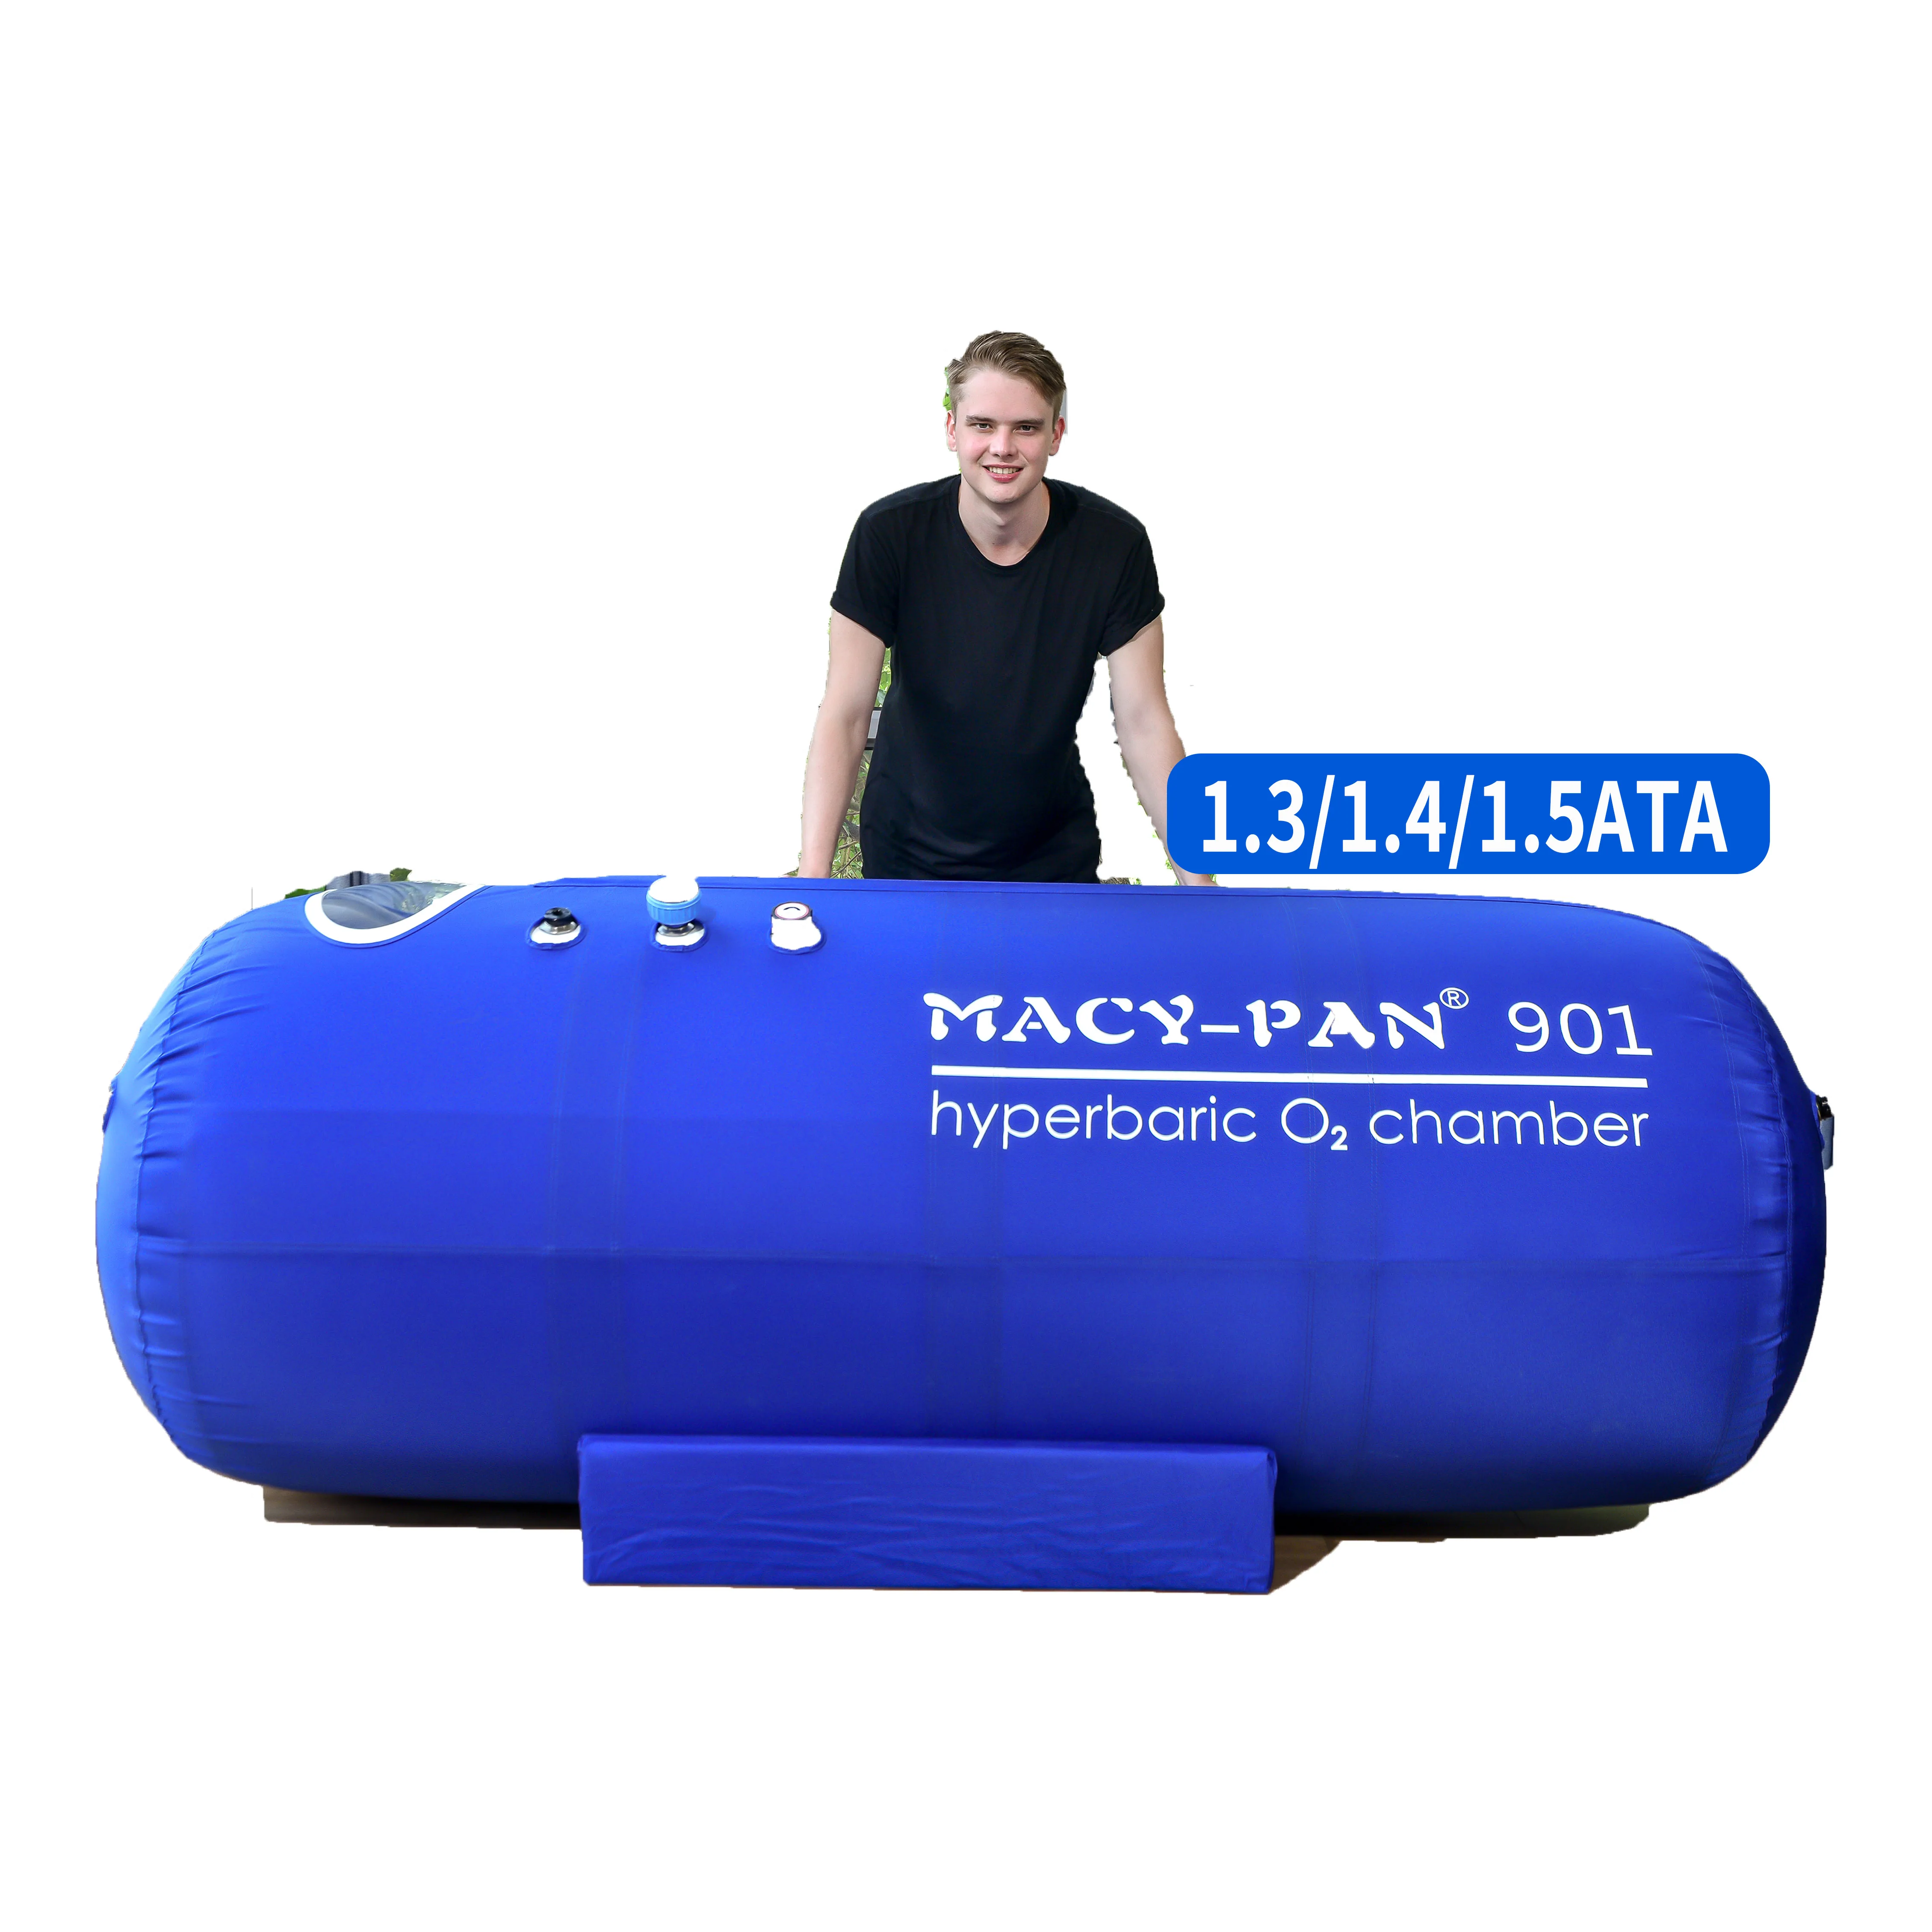 Macy-Pan ST901 Portable Hyperbaric Chambers 1.3/1.4/1.5 ATA HBOT Hyperbaric Oxygen Therapy Home Rehabilitation Therapy Supplies